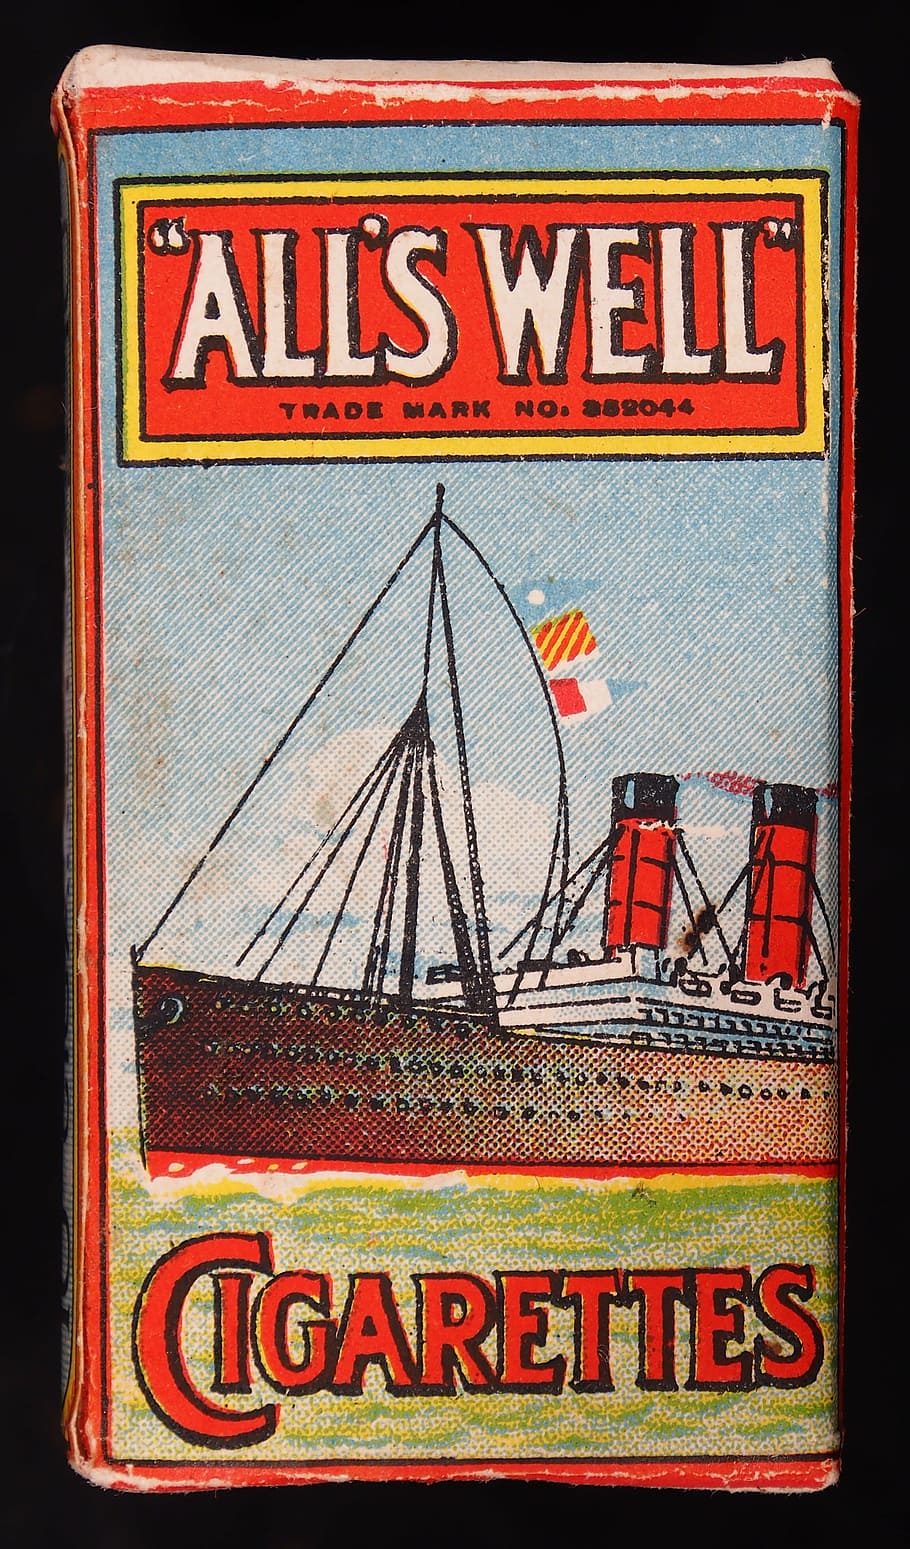 alls well, cigarettes, pack, old, packaging, product, box, retro, vintage, communication